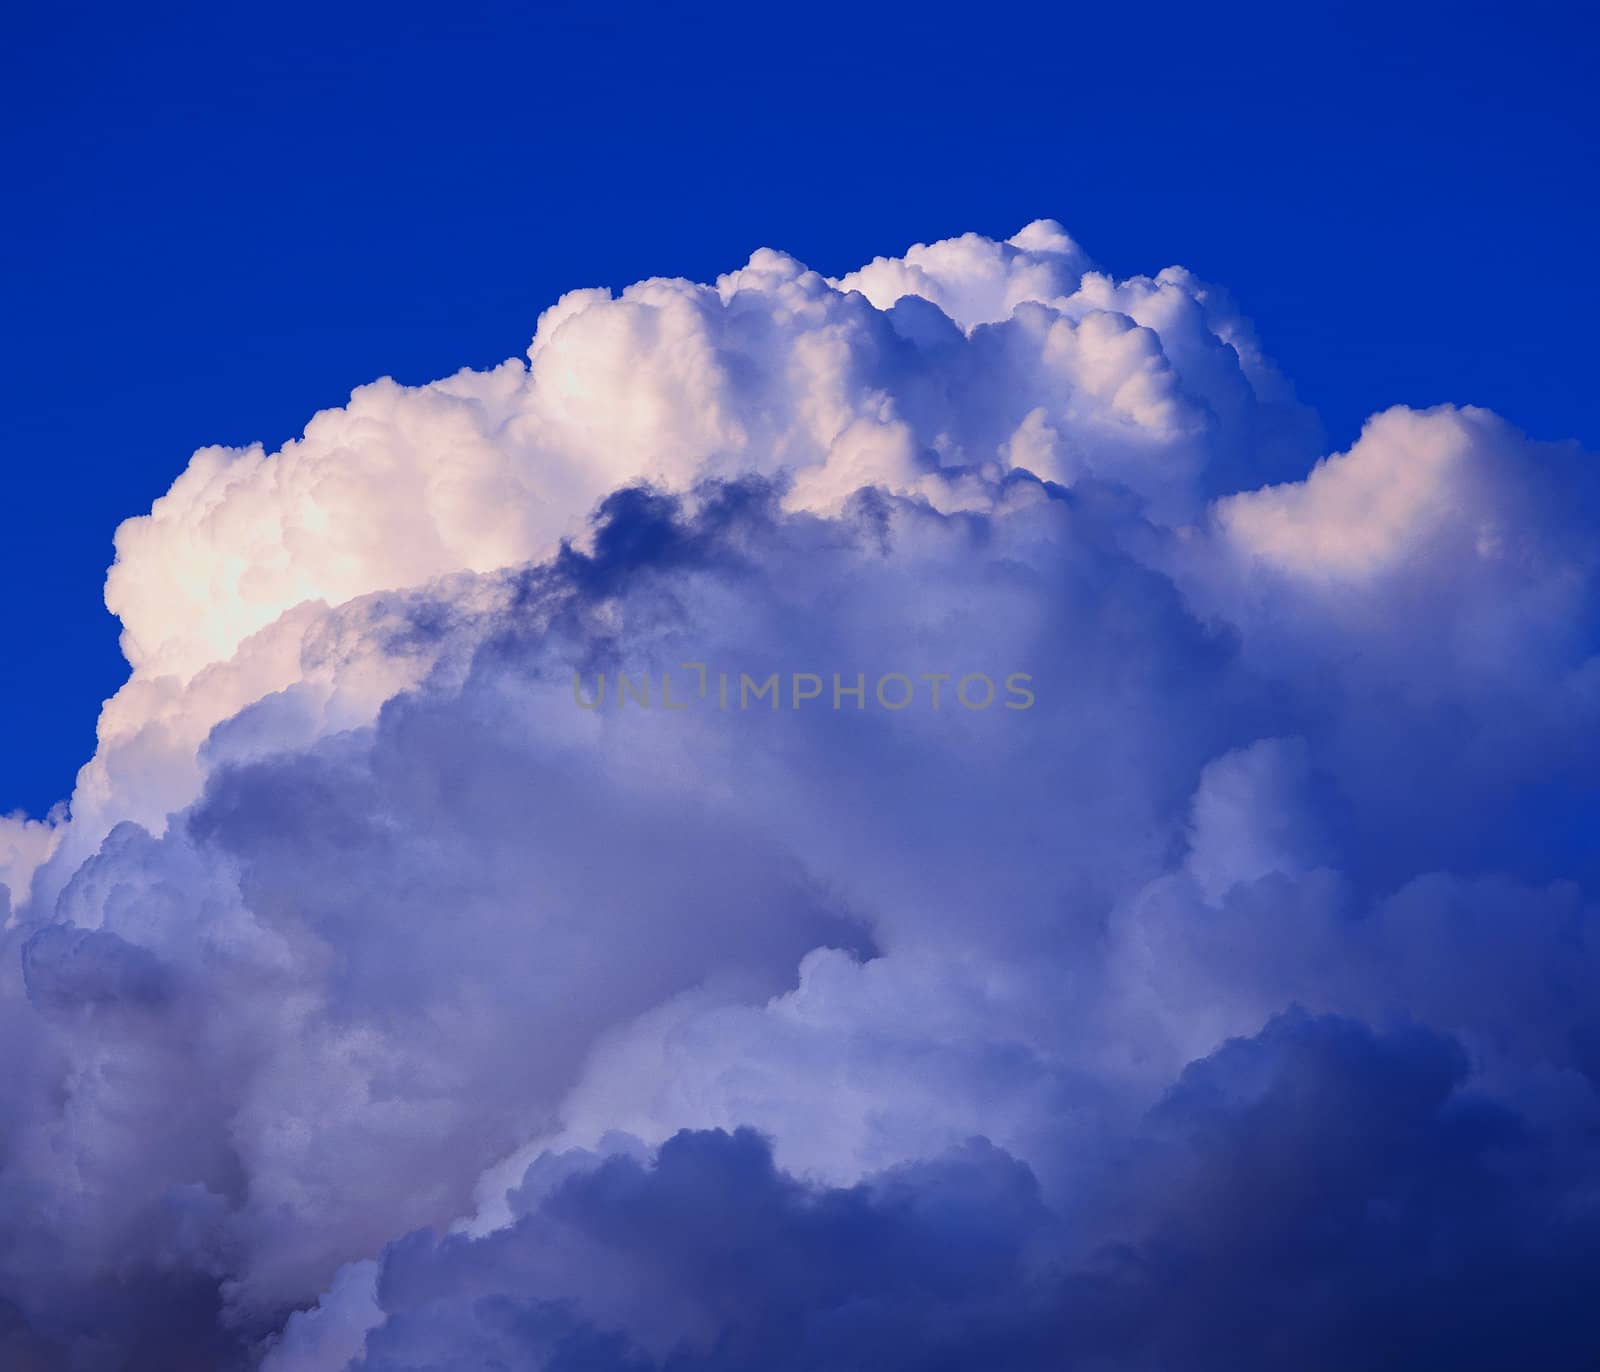 blue sky and clouds by Baltus